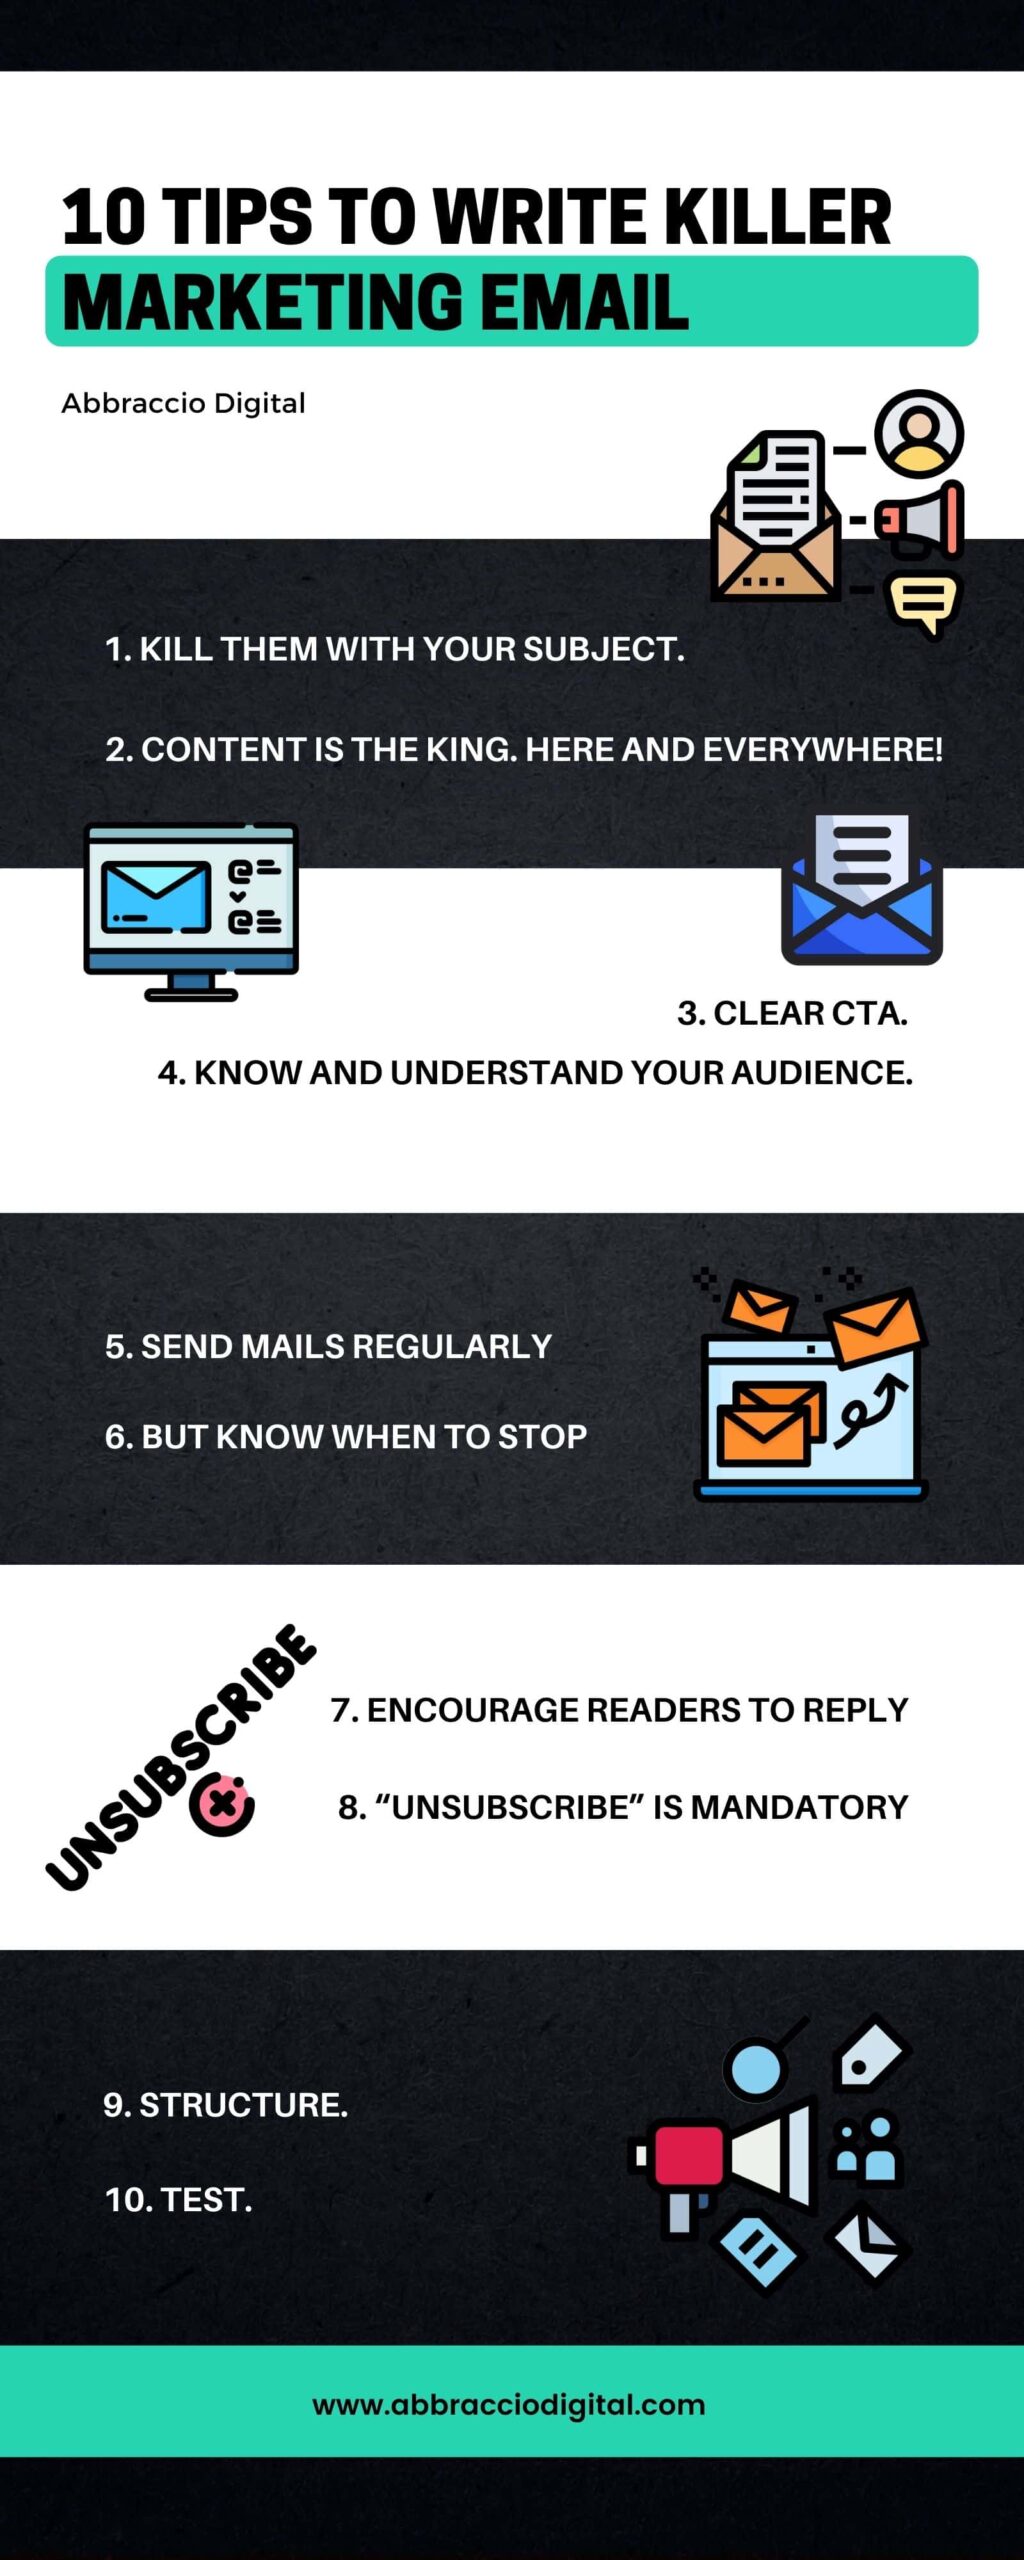 10 Tips to write killer marketing email